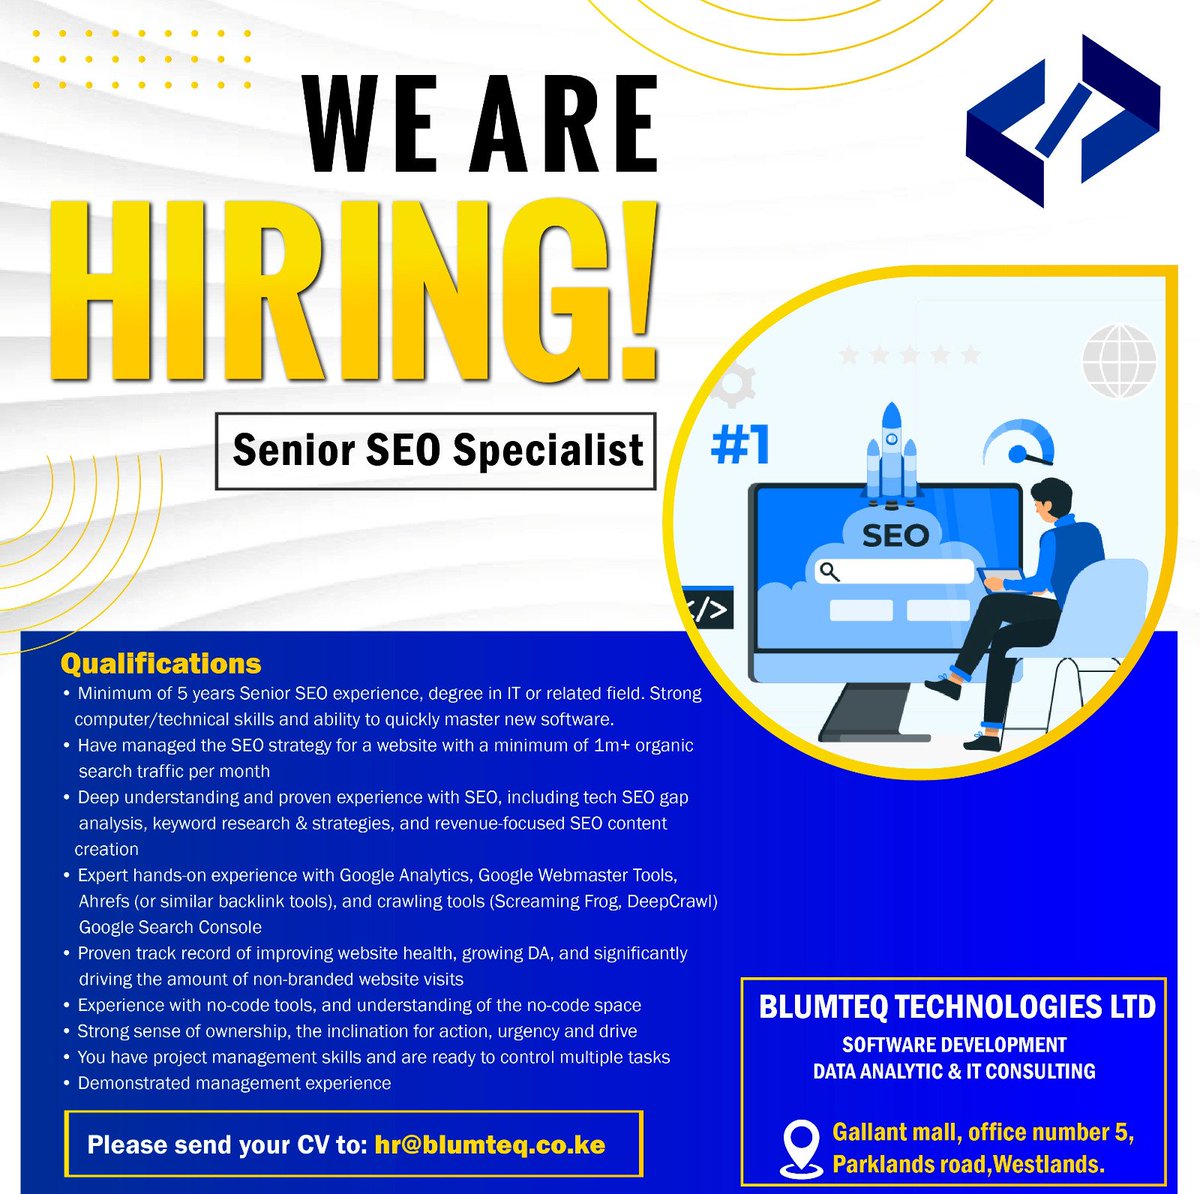 If you have happen to see this on your Timeline, kindly Retweet Widely! Blumteq Technologies is hiring.